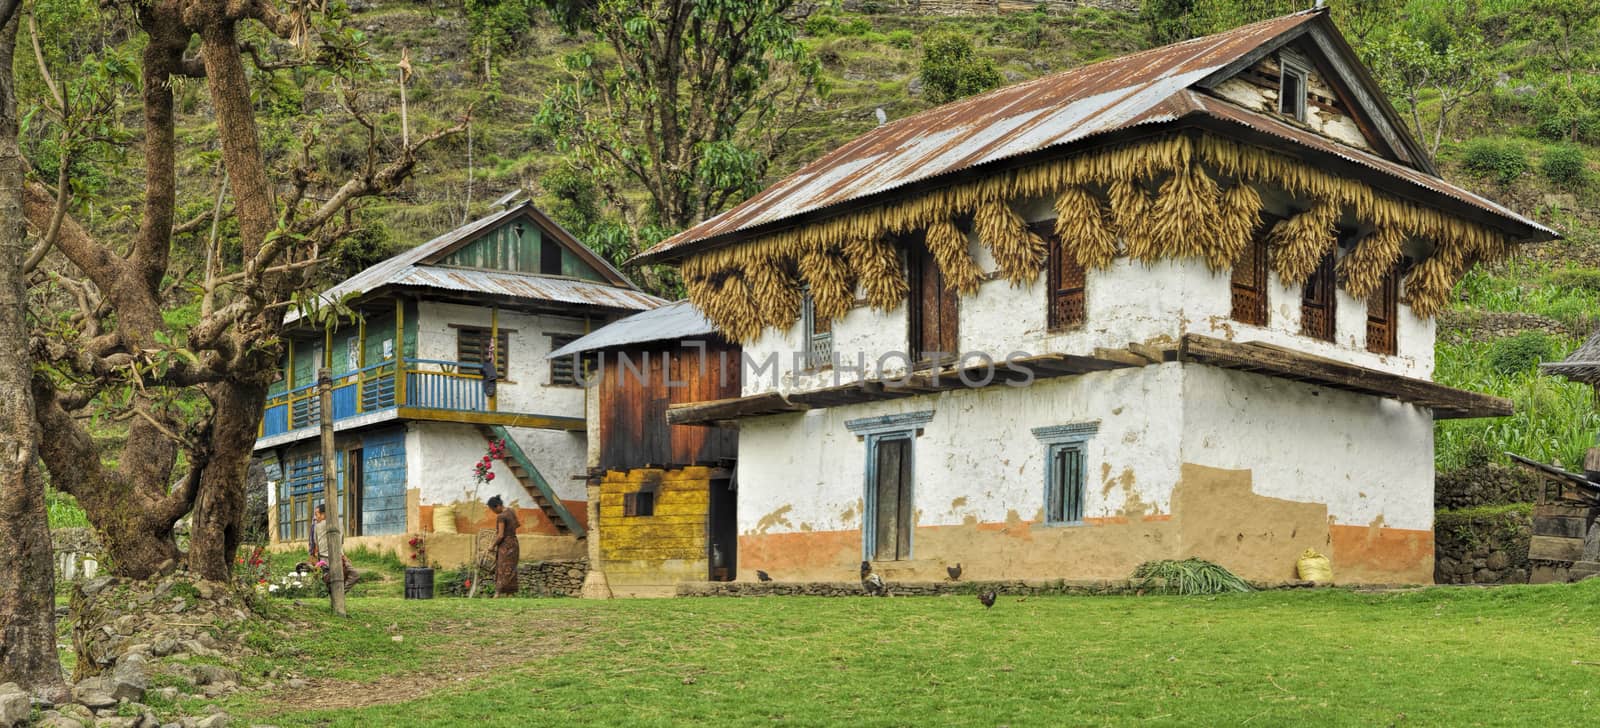 Traditional old houses in Nepal